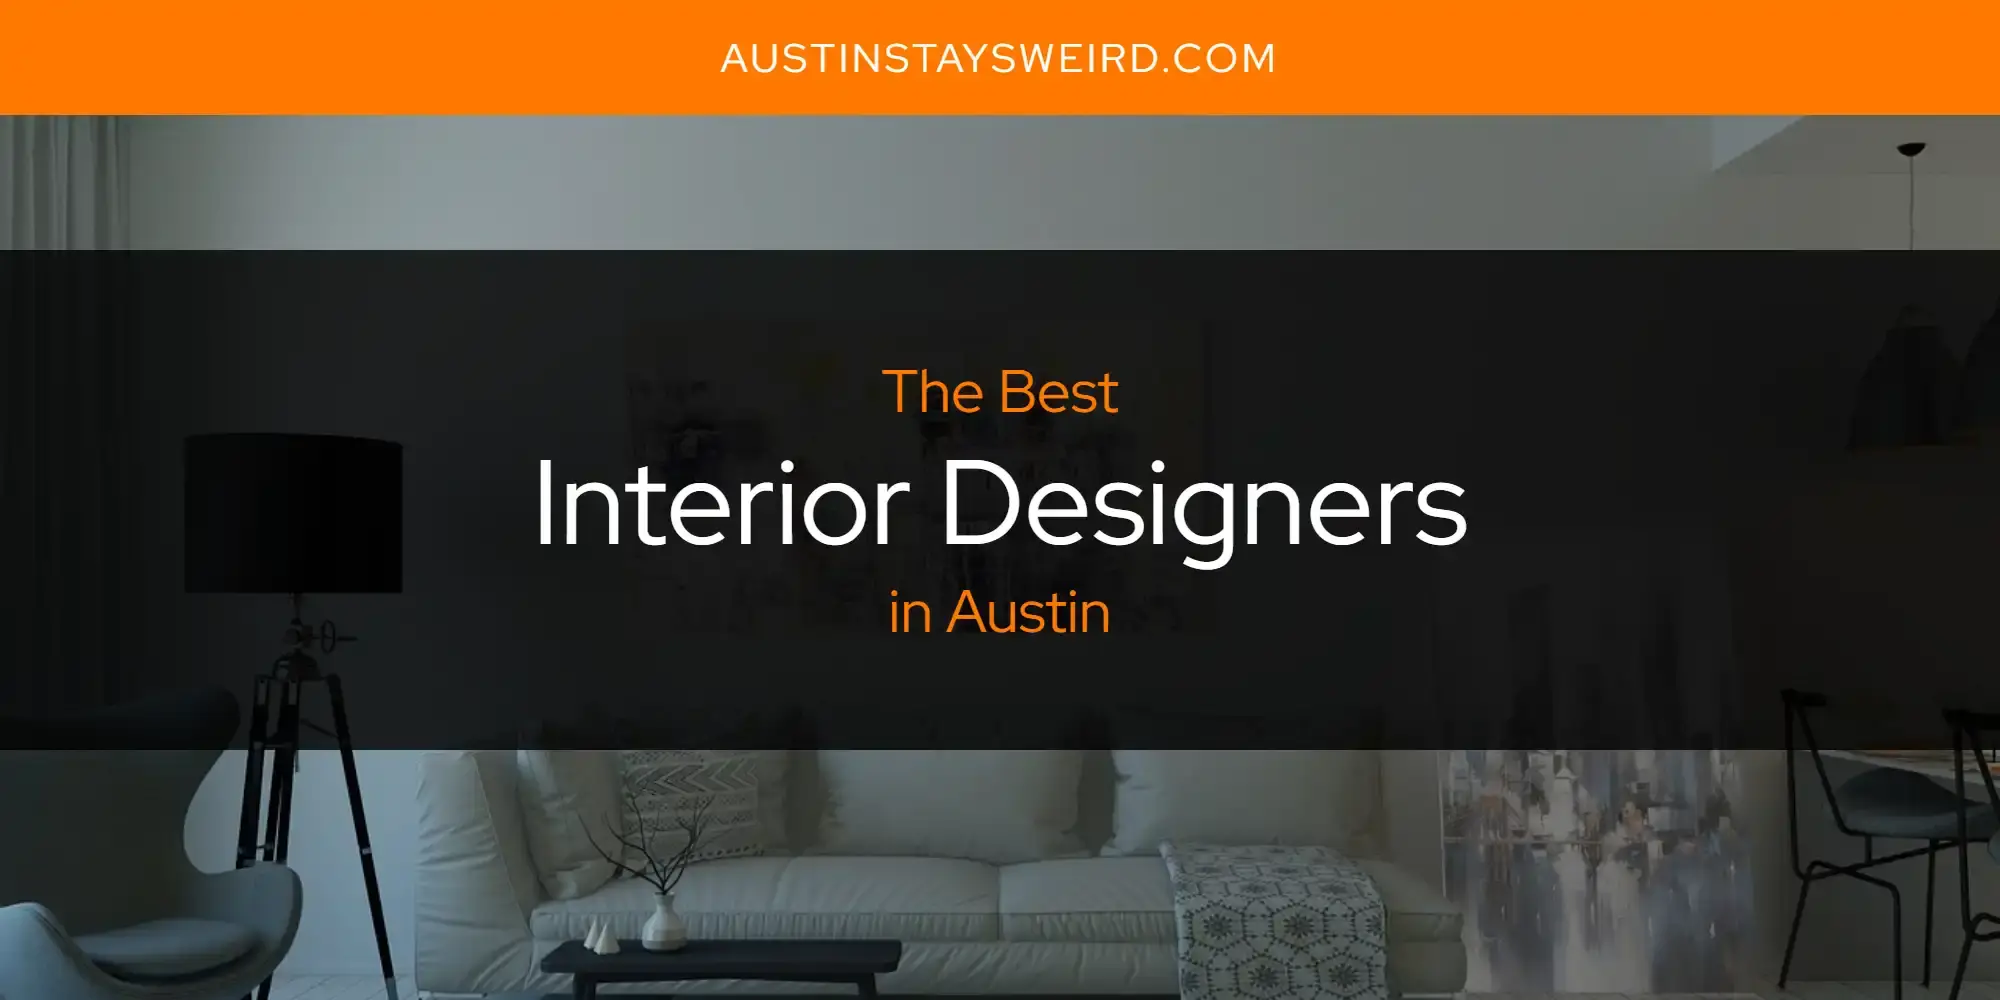 Best Interior Designers in Austin? Here's the Top 8